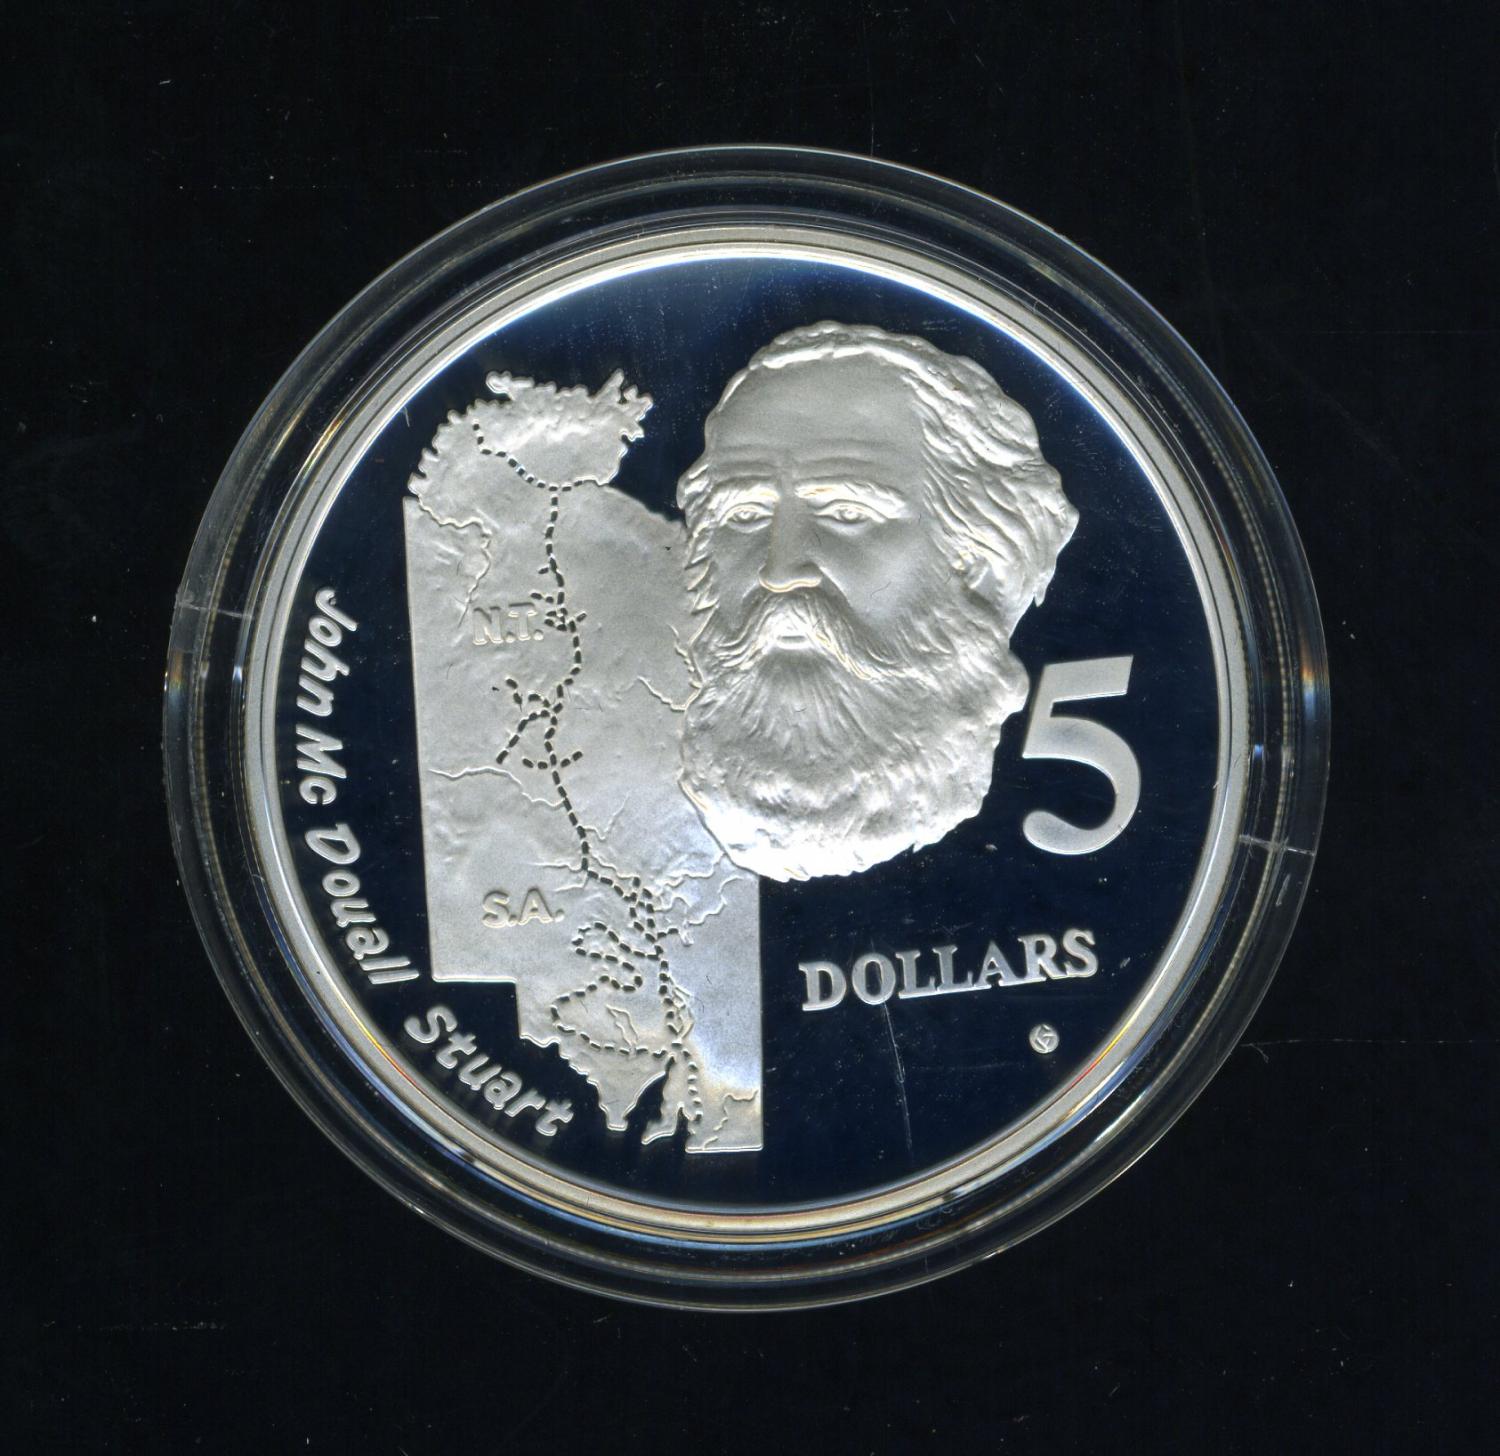 Thumbnail for 1994 Australian $5 Silver Coin From Masterpieces in Silver Set - John McDouall Stuart.  The Coin is Sterling Silver and contains over 1oz of Pure Silver.